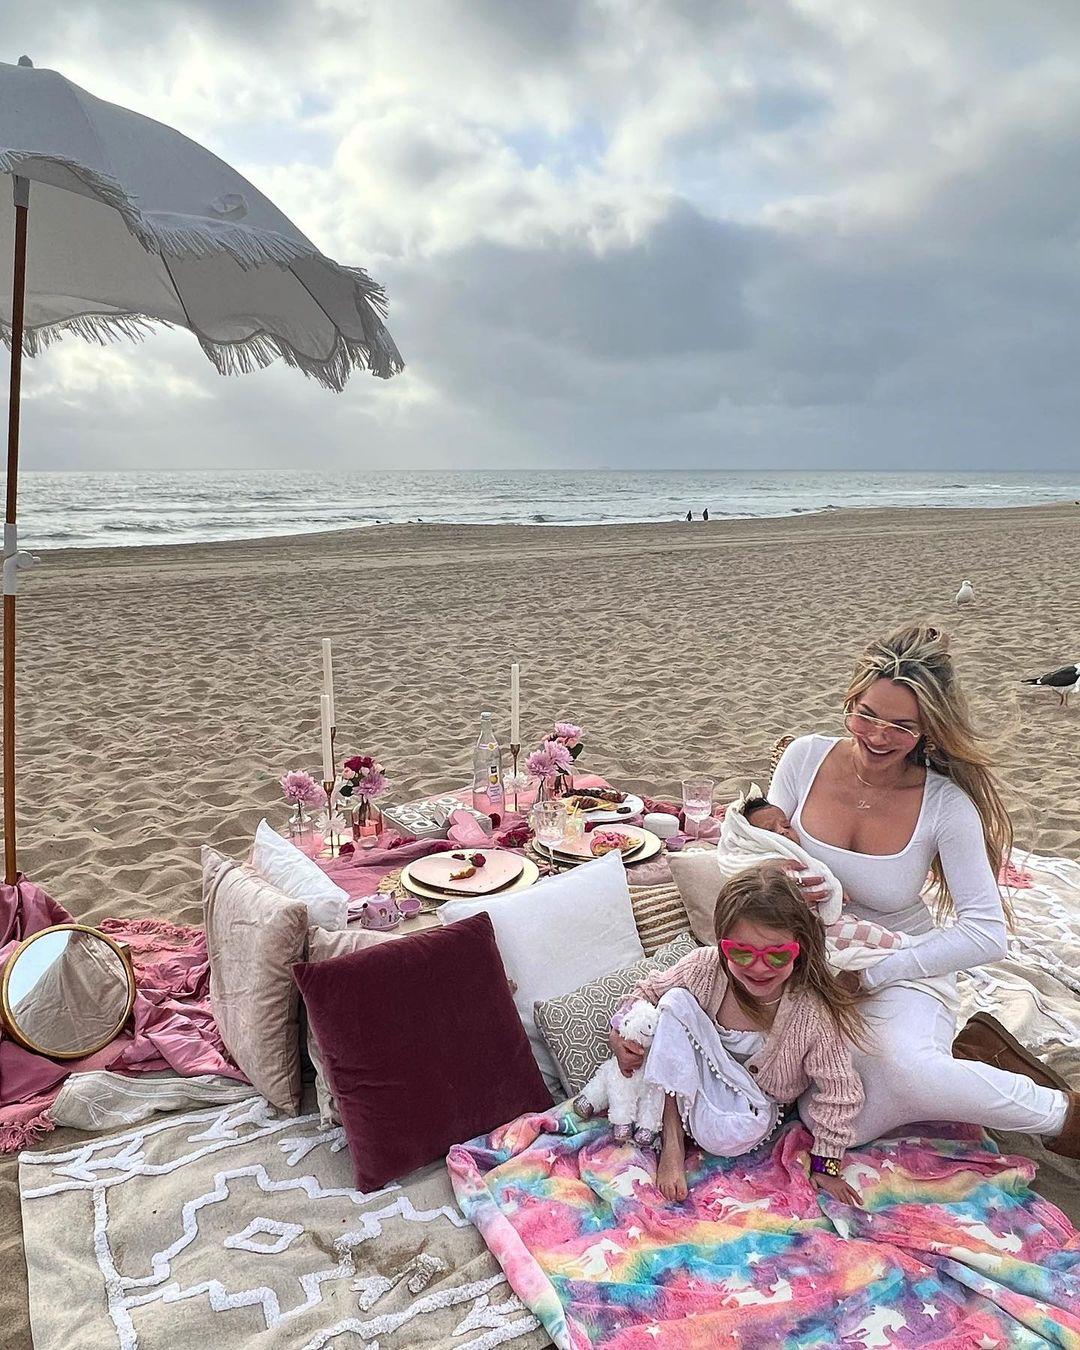 Alyssa Scott Treats Daughter To Beach Day Out For Her Birthday Celebration